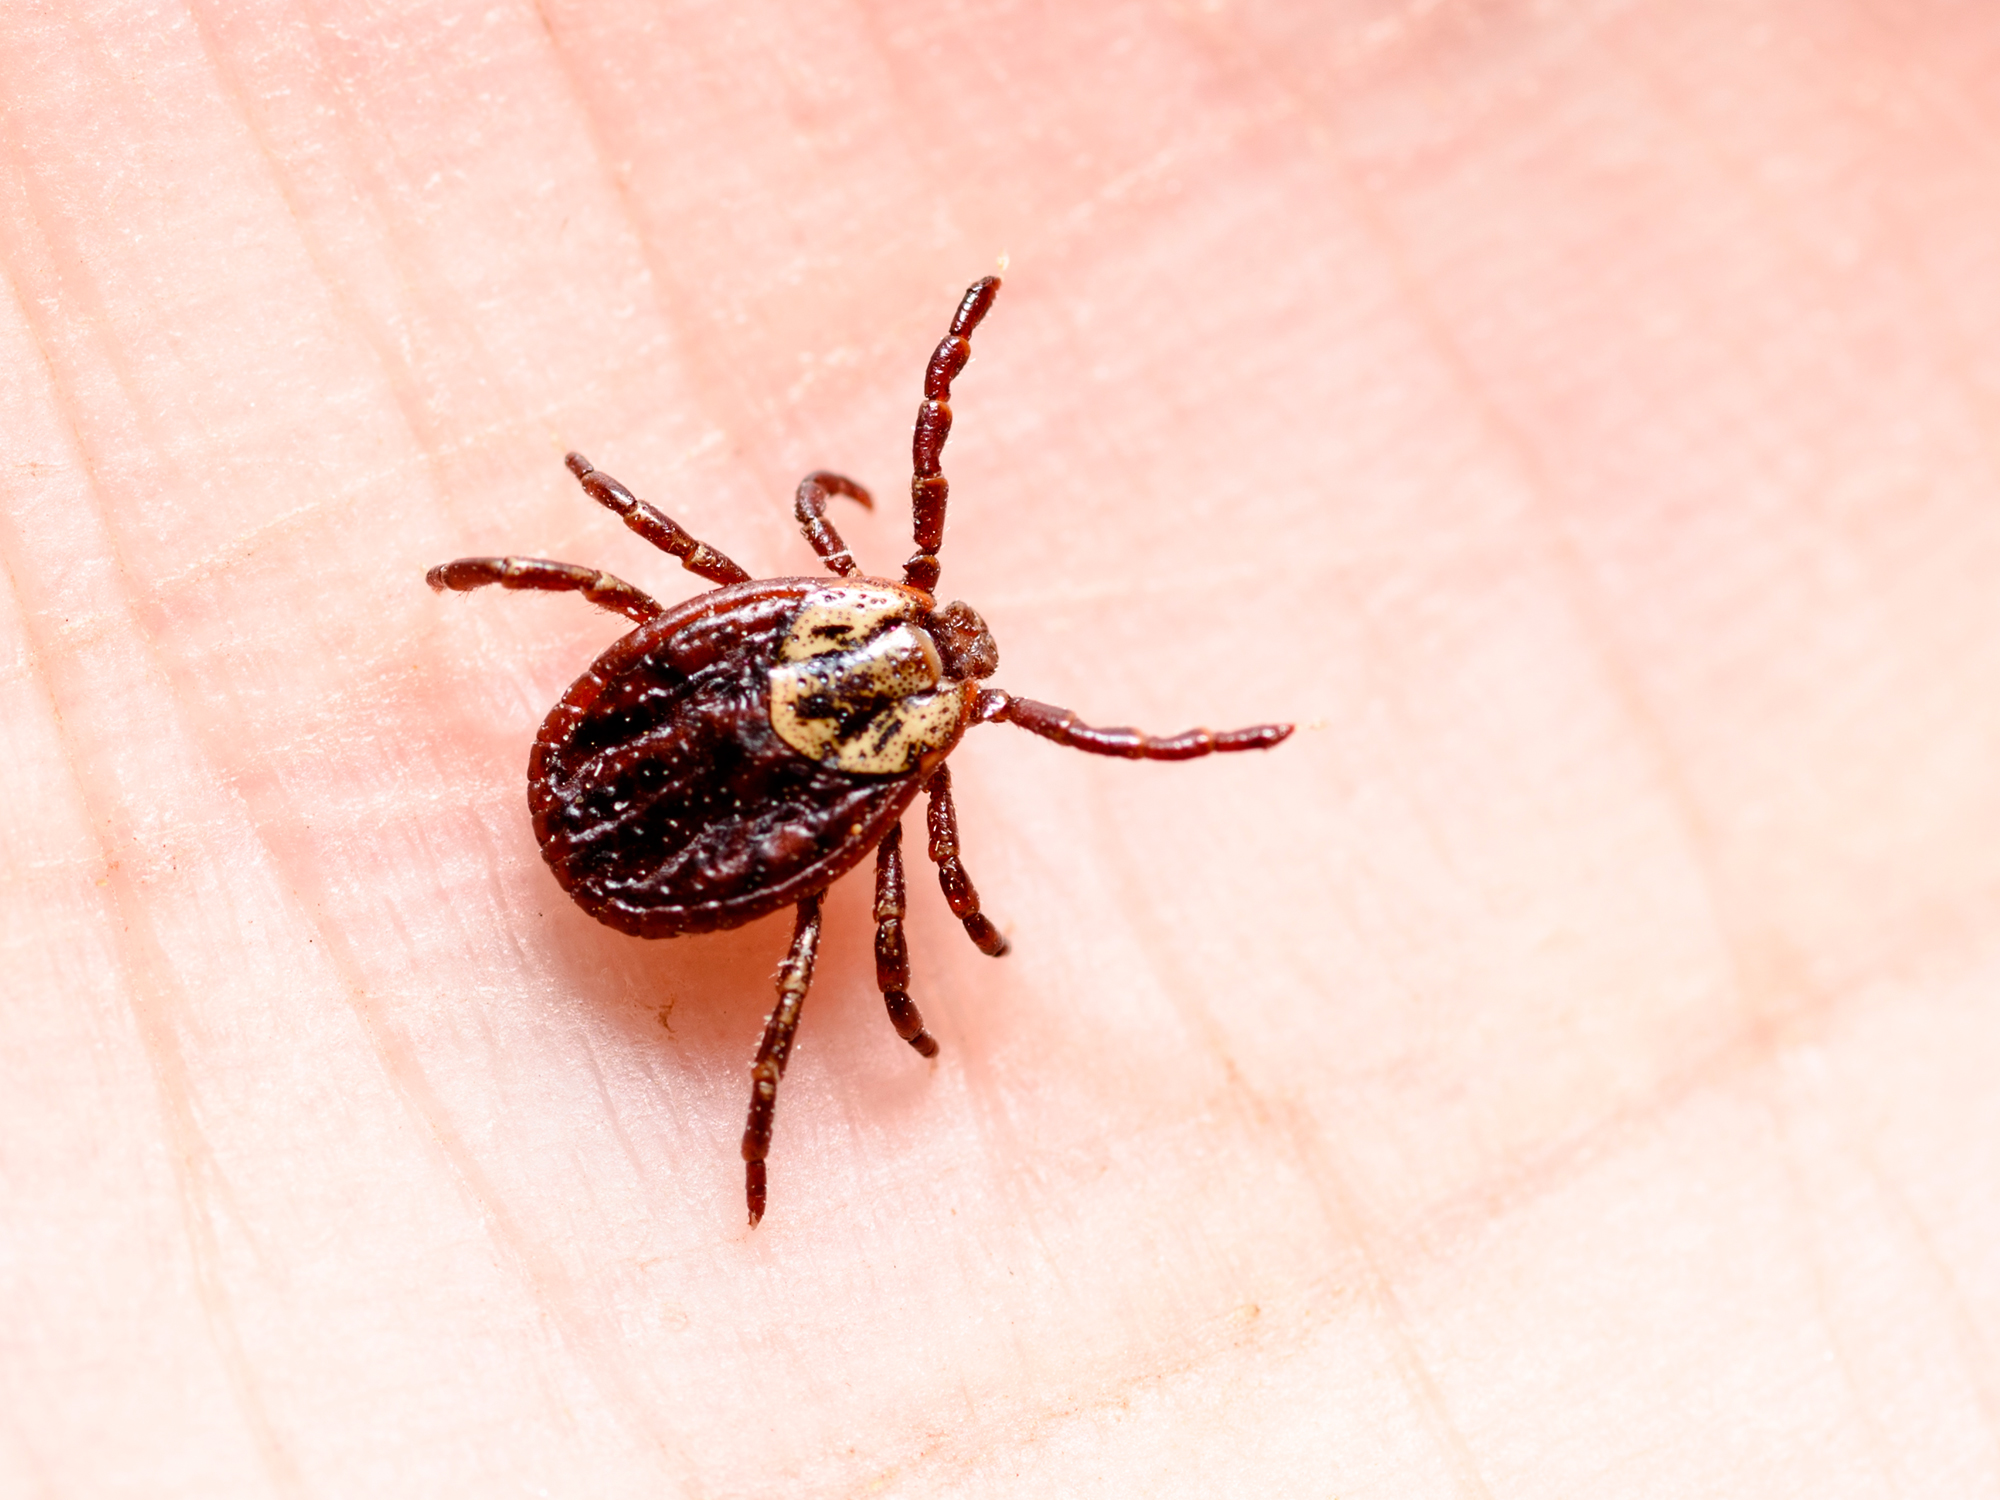 AGS danger from ticks is greater than expected 